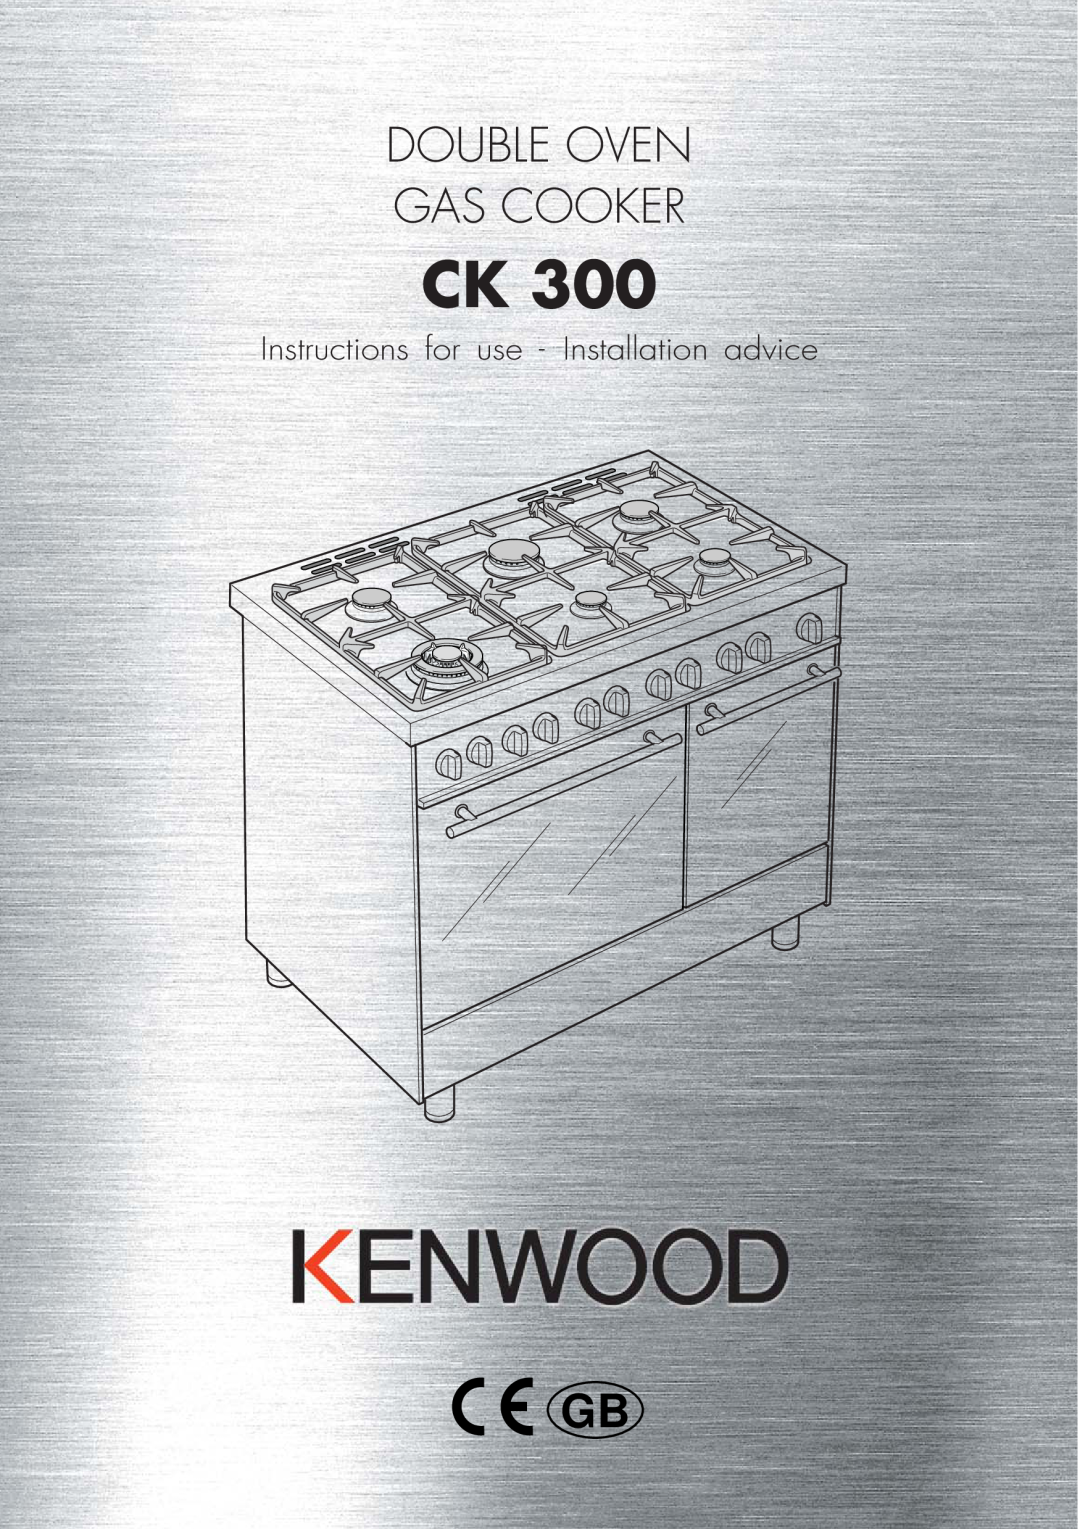 Kenwood CK 300 manual Double Oven Gas Cooker, Instructions for use - Installation advice 